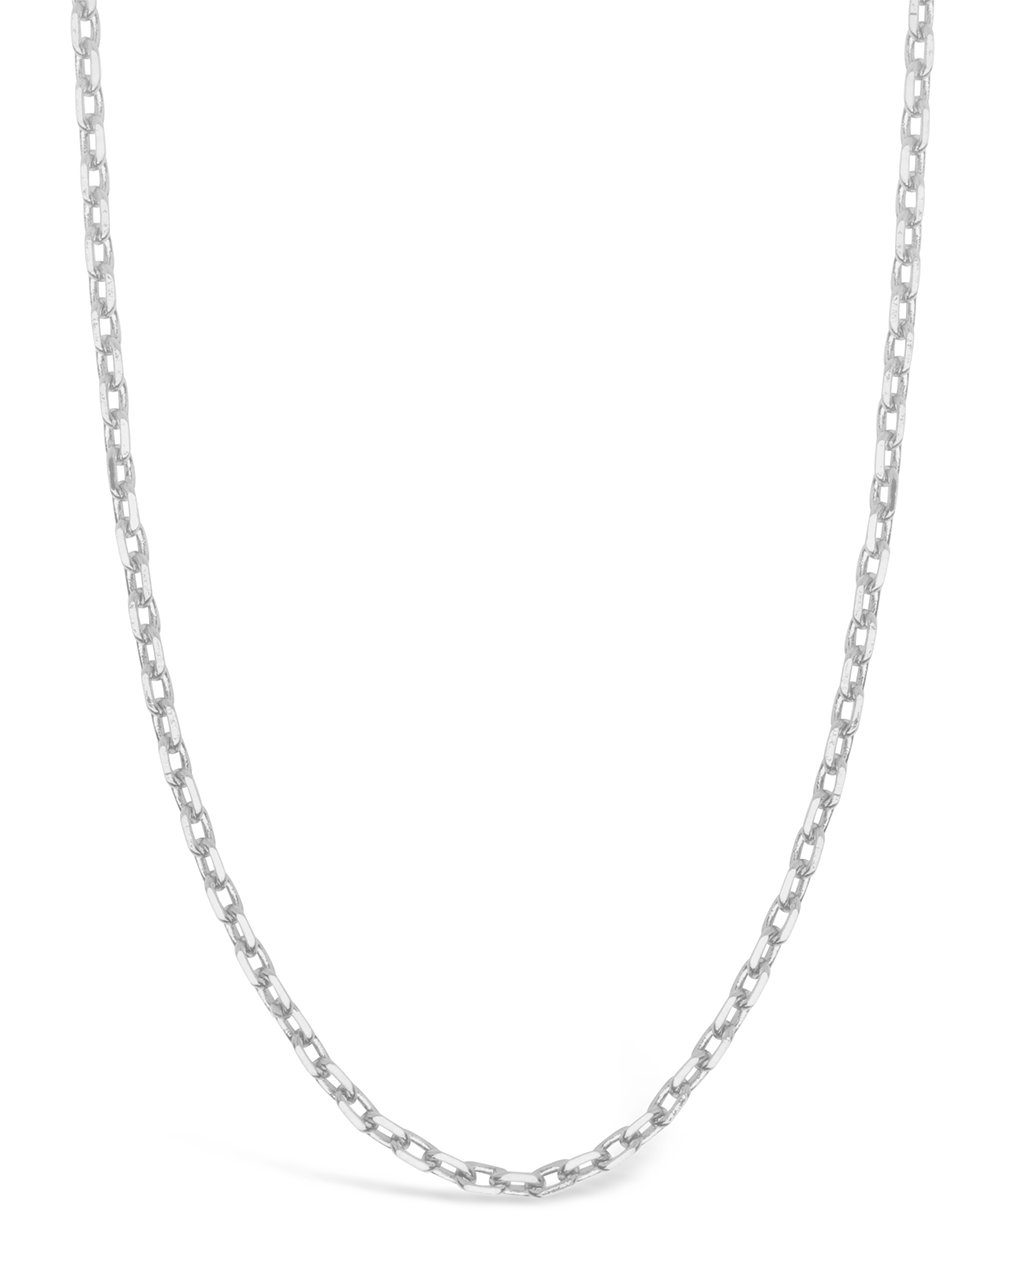 Chunky Link Face Mask Chain Face Mask Chain Sterling Forever Silver 